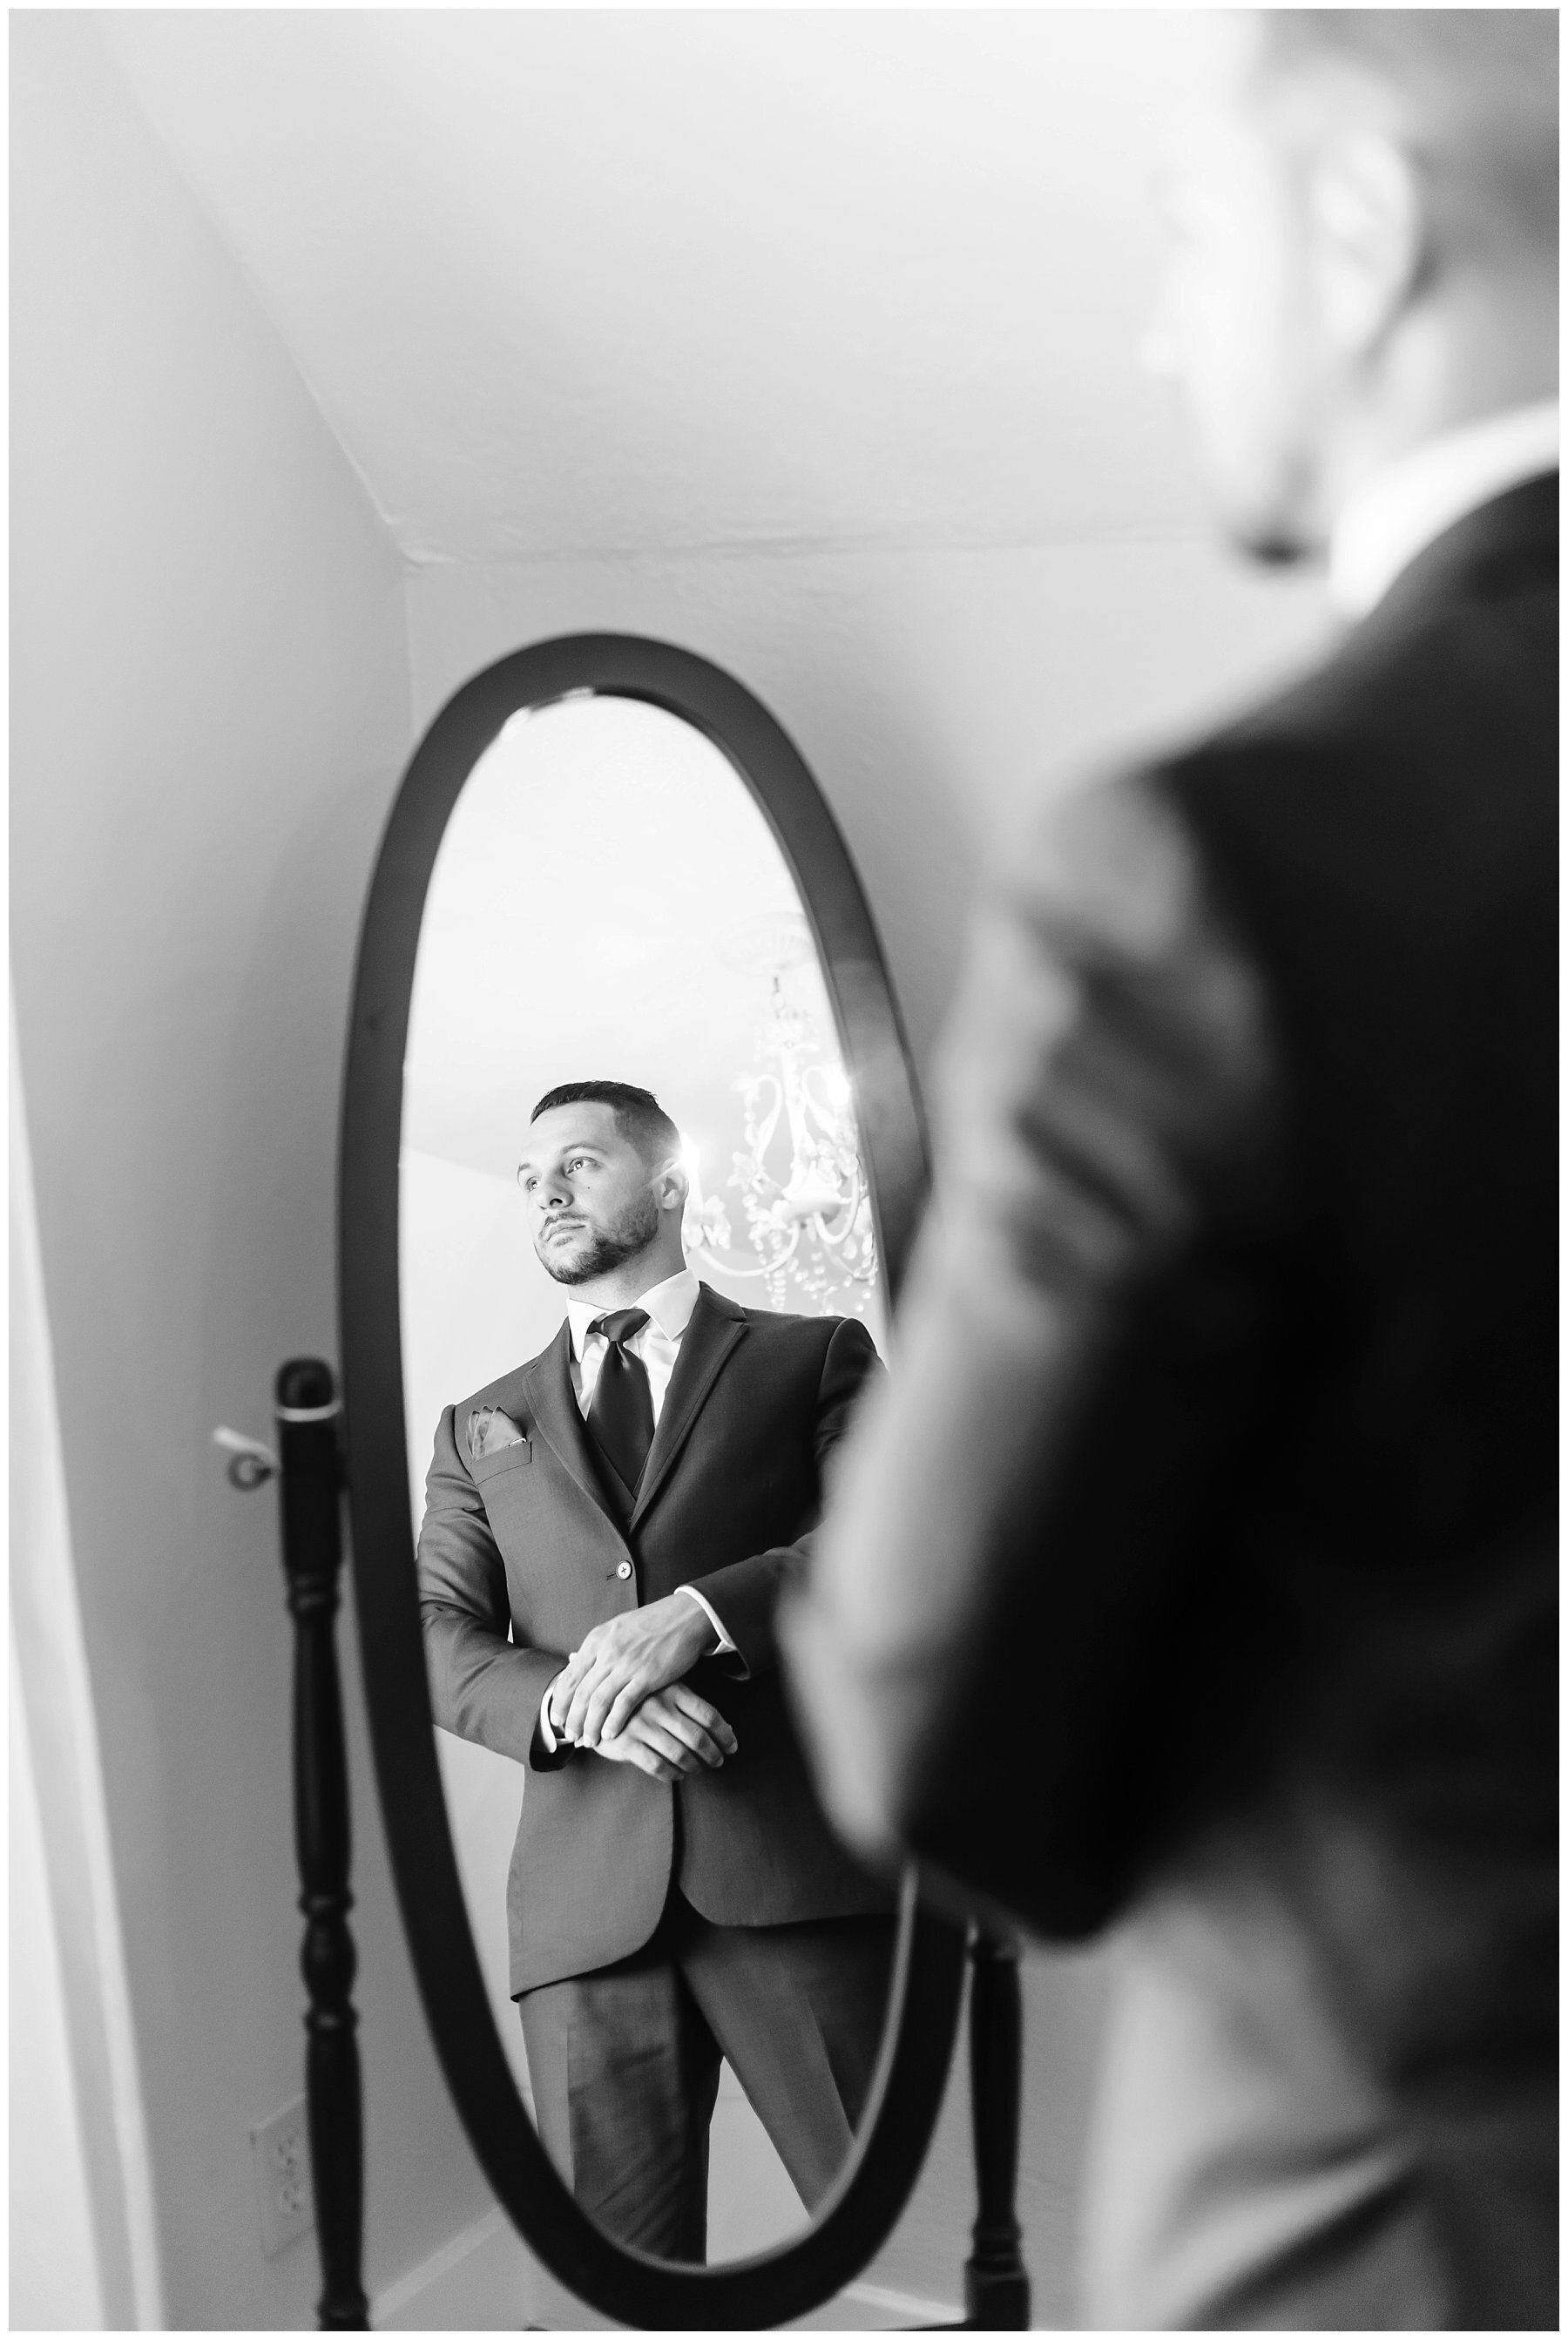  groom getting ready in the mirror 